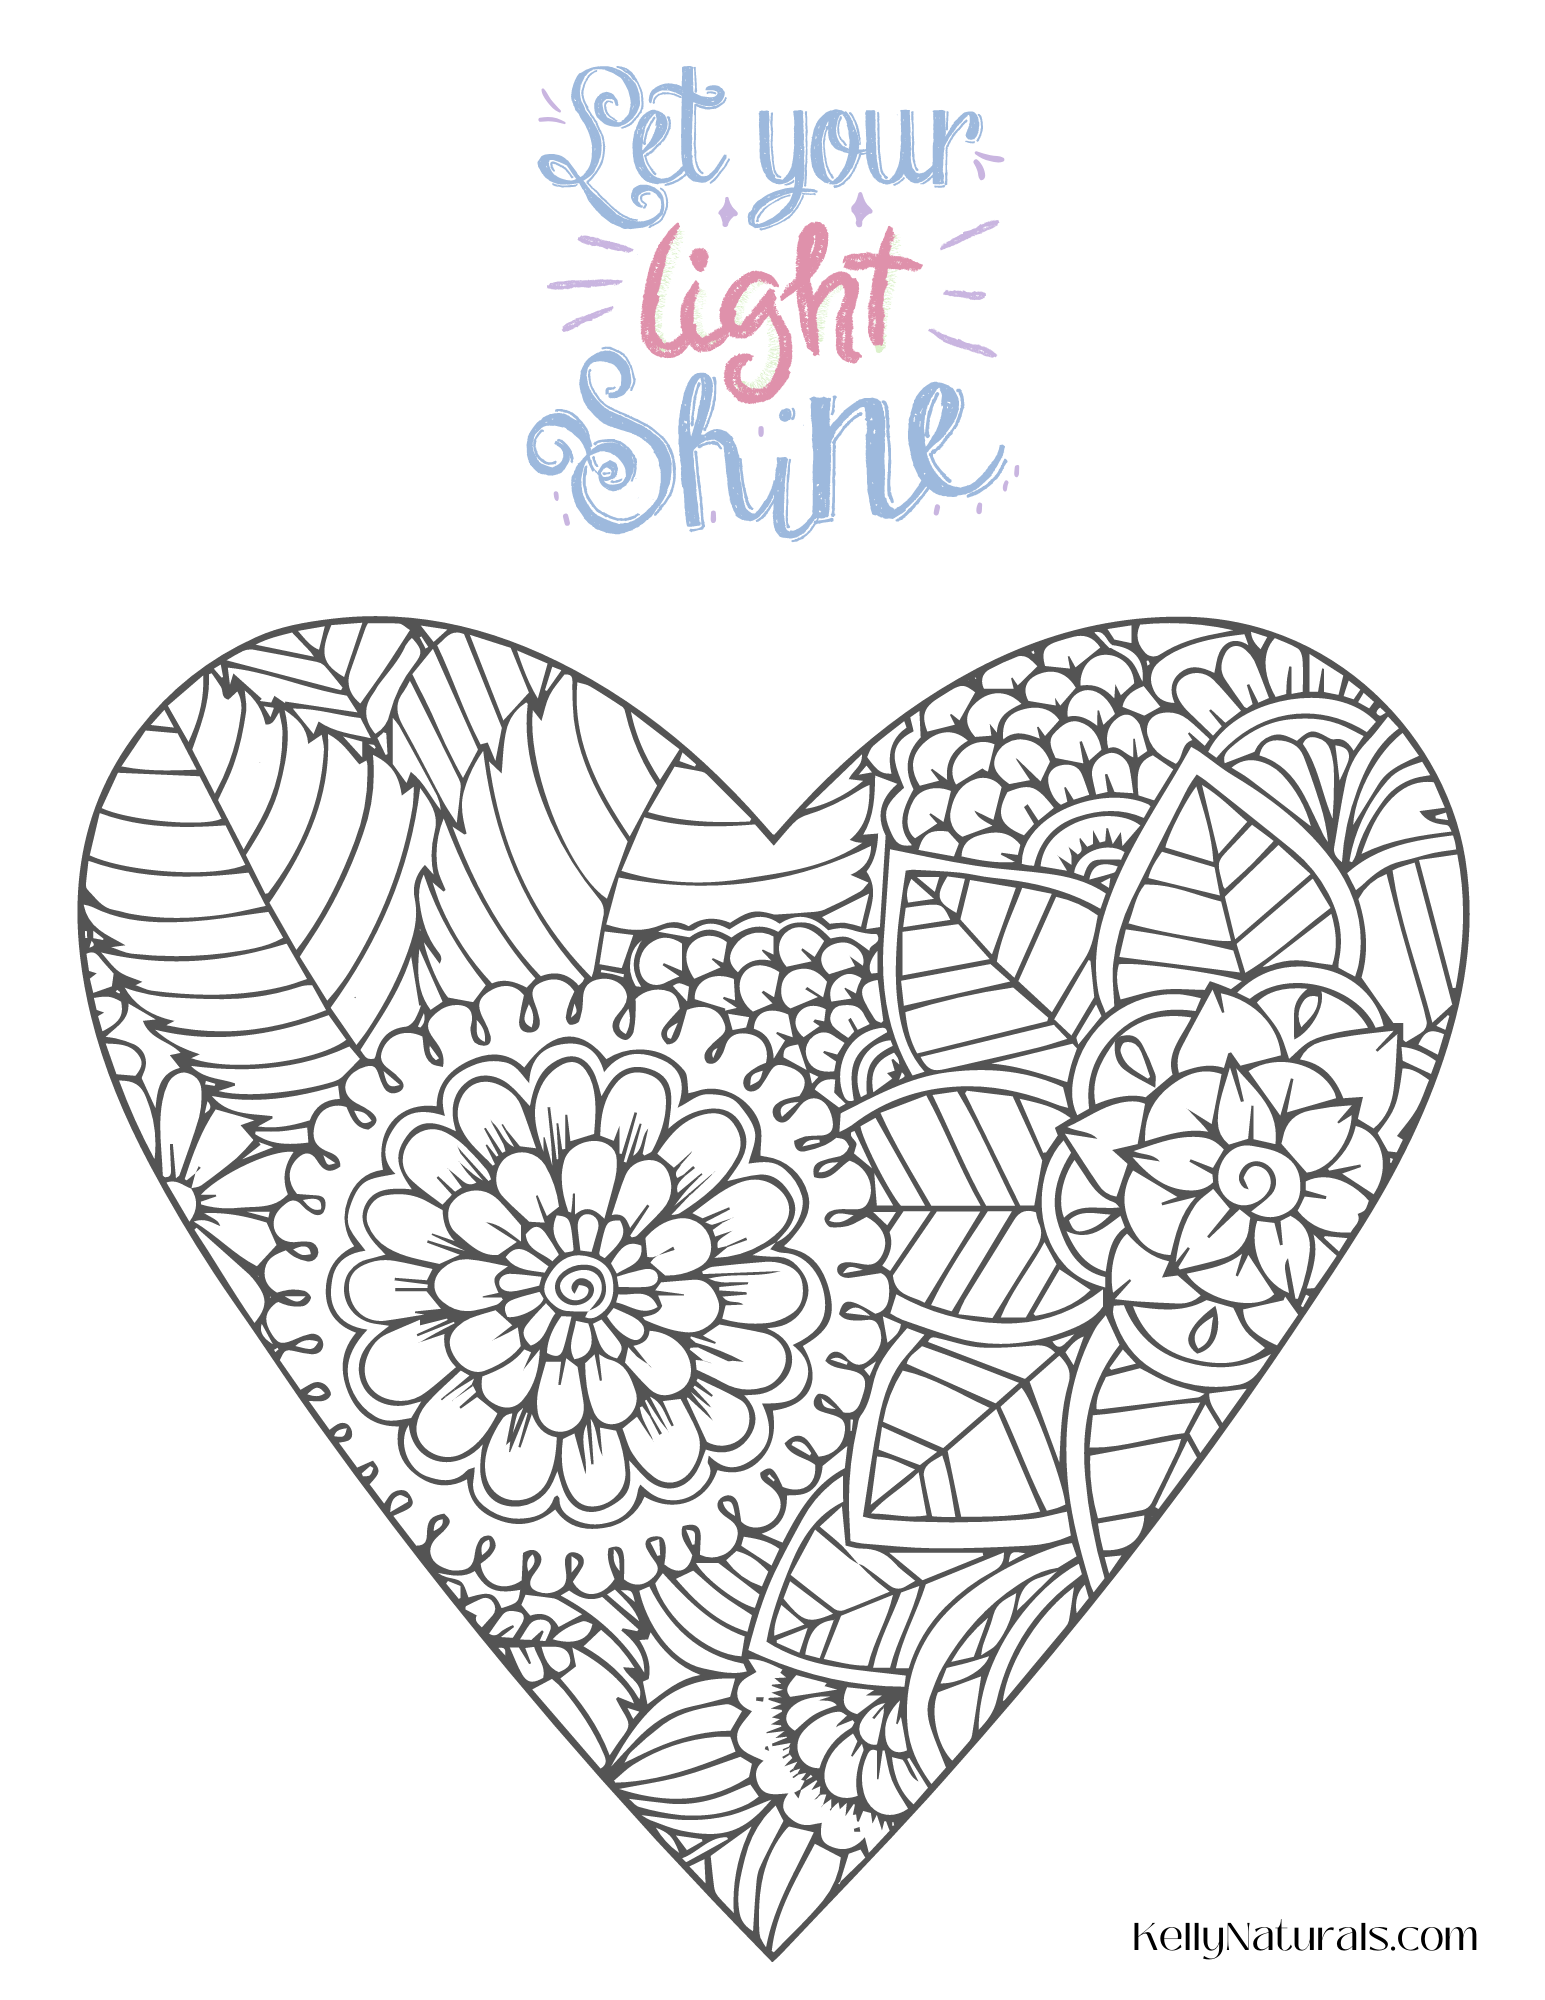 Let your light shine coloring page